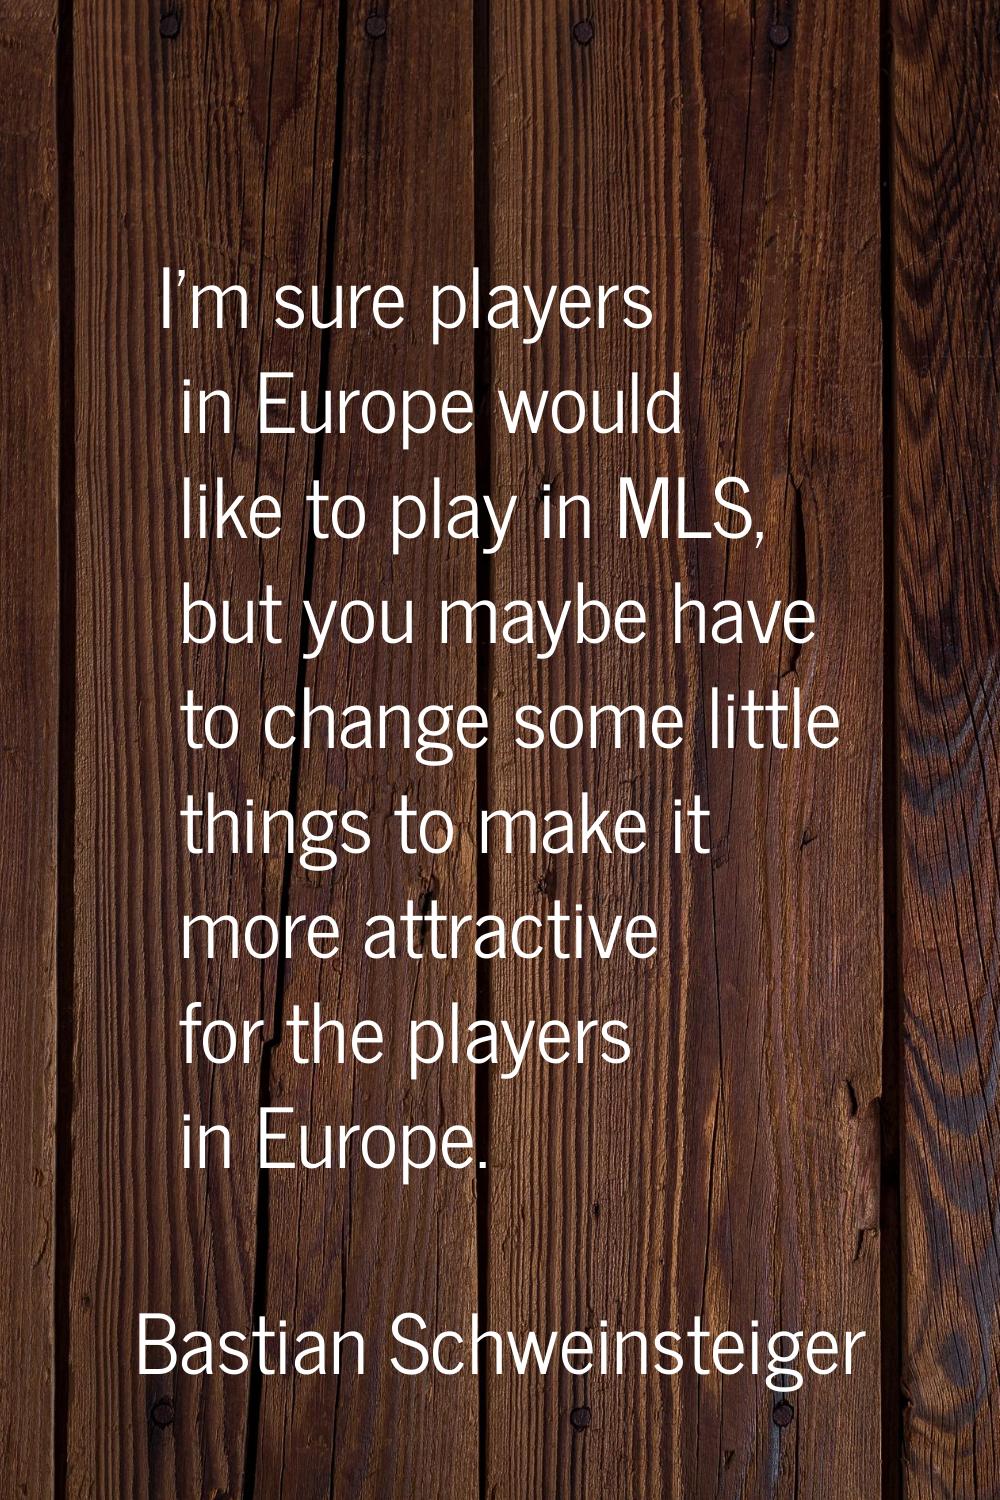 I'm sure players in Europe would like to play in MLS, but you maybe have to change some little thin